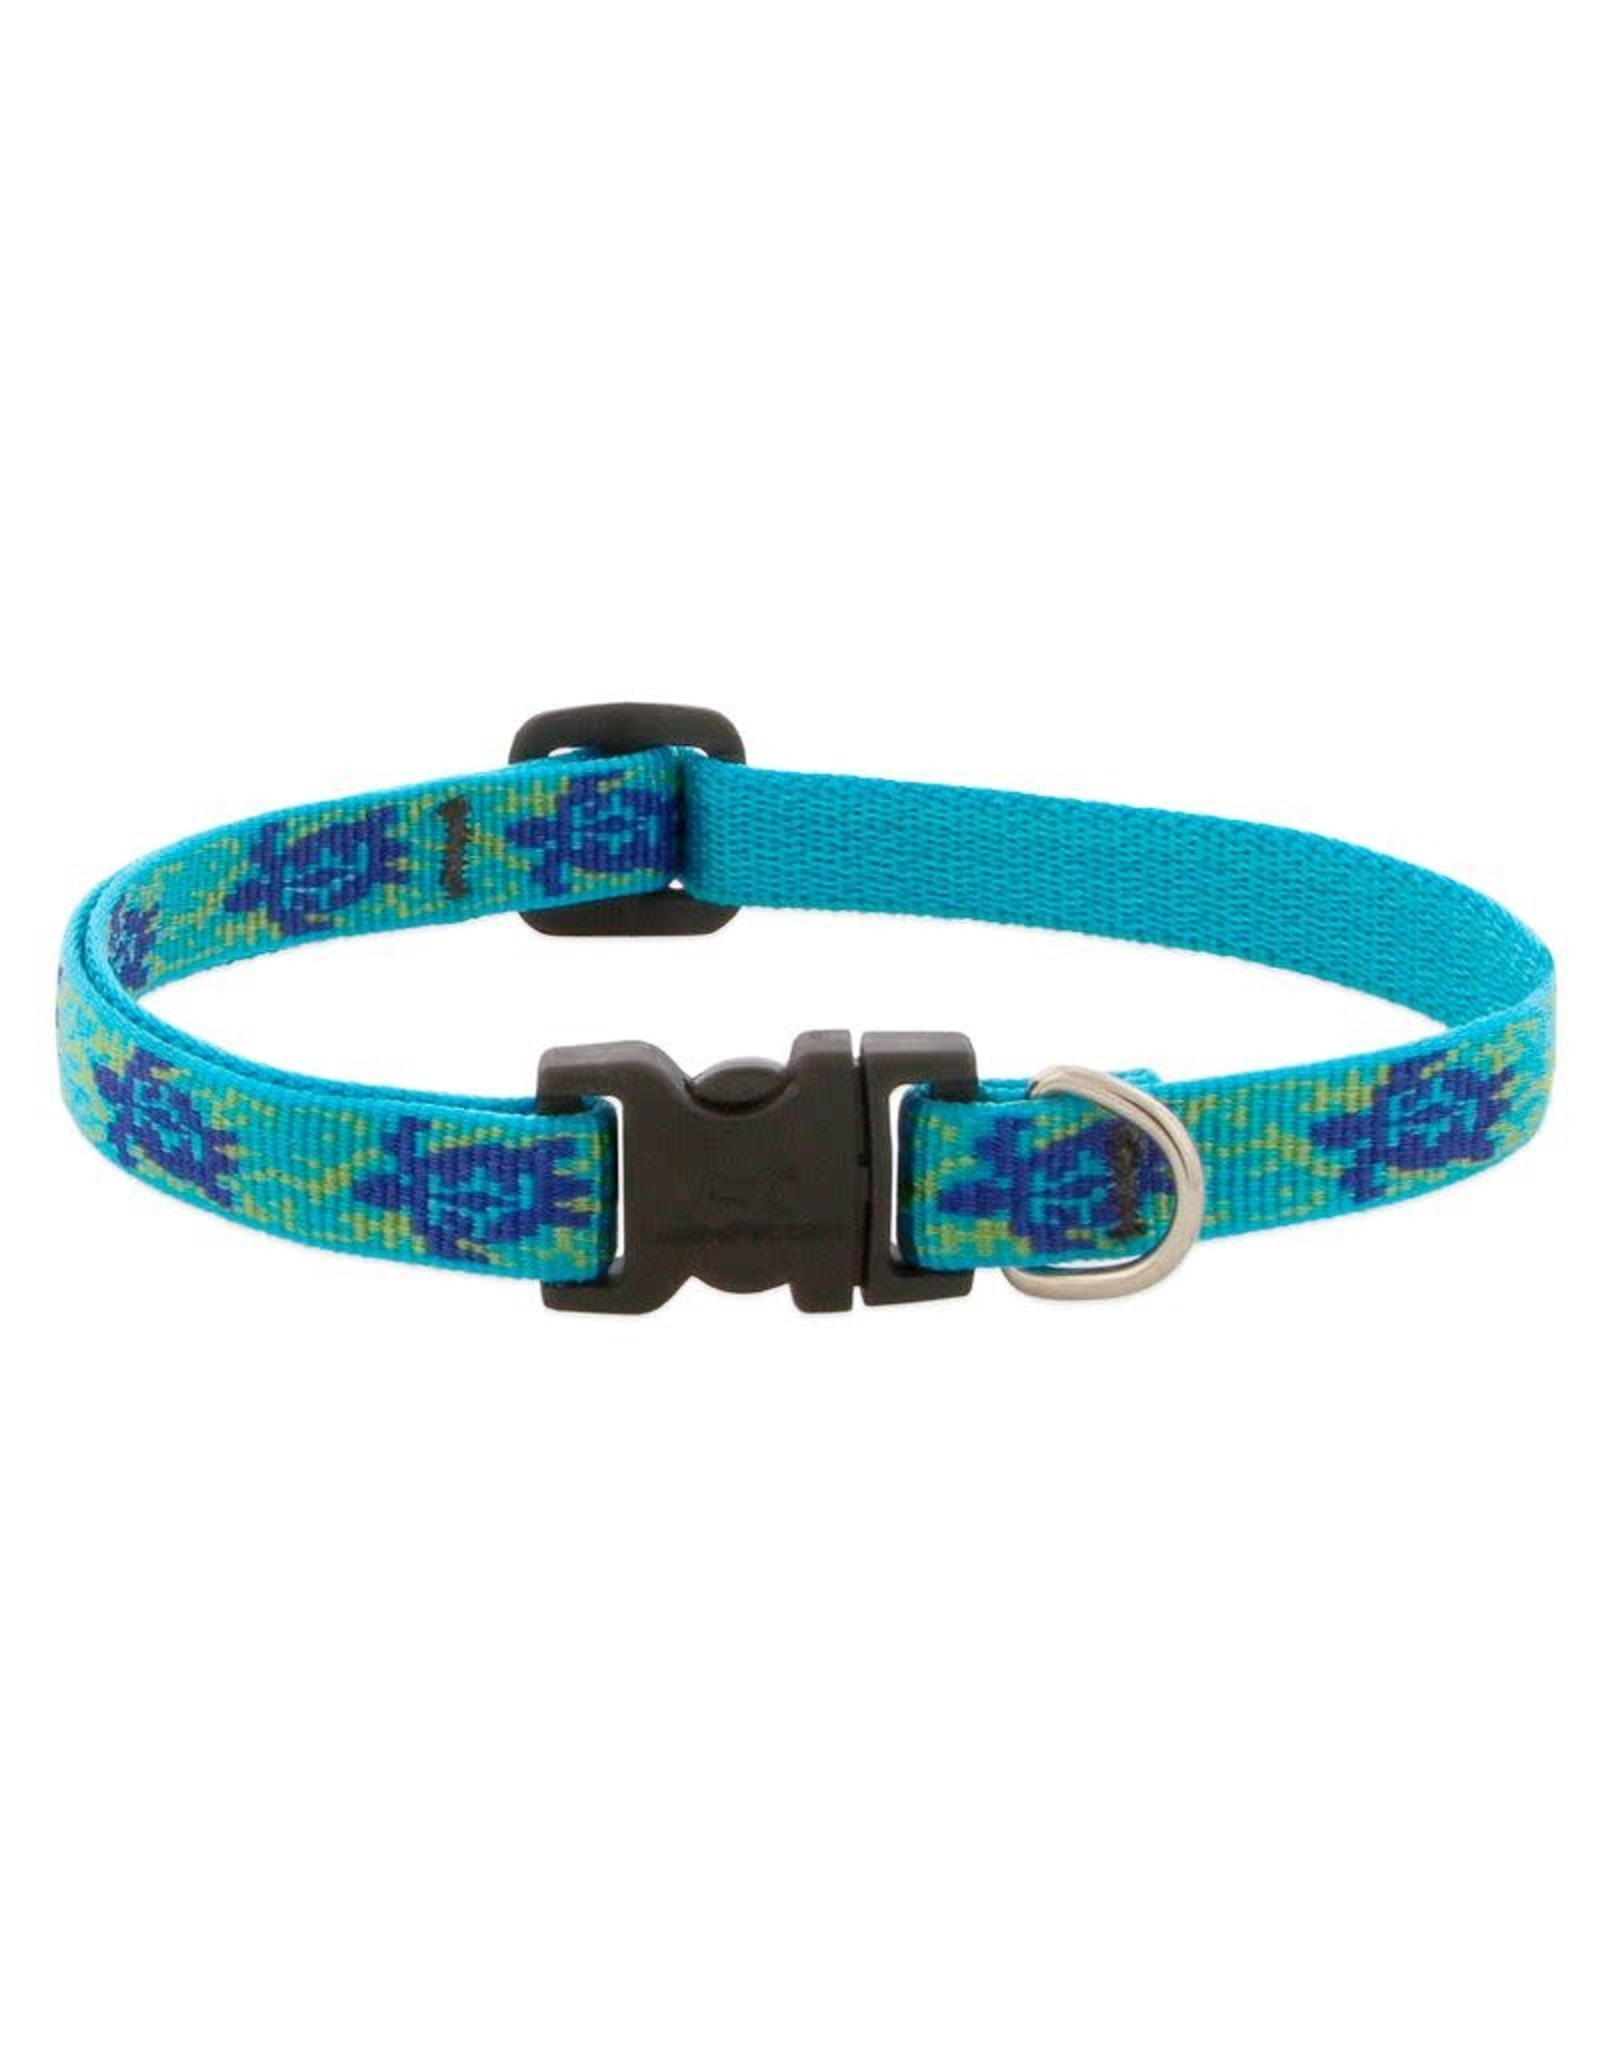 Lupine Lupine Turtle Reef Collar: 1 in wide, 12-20 inch